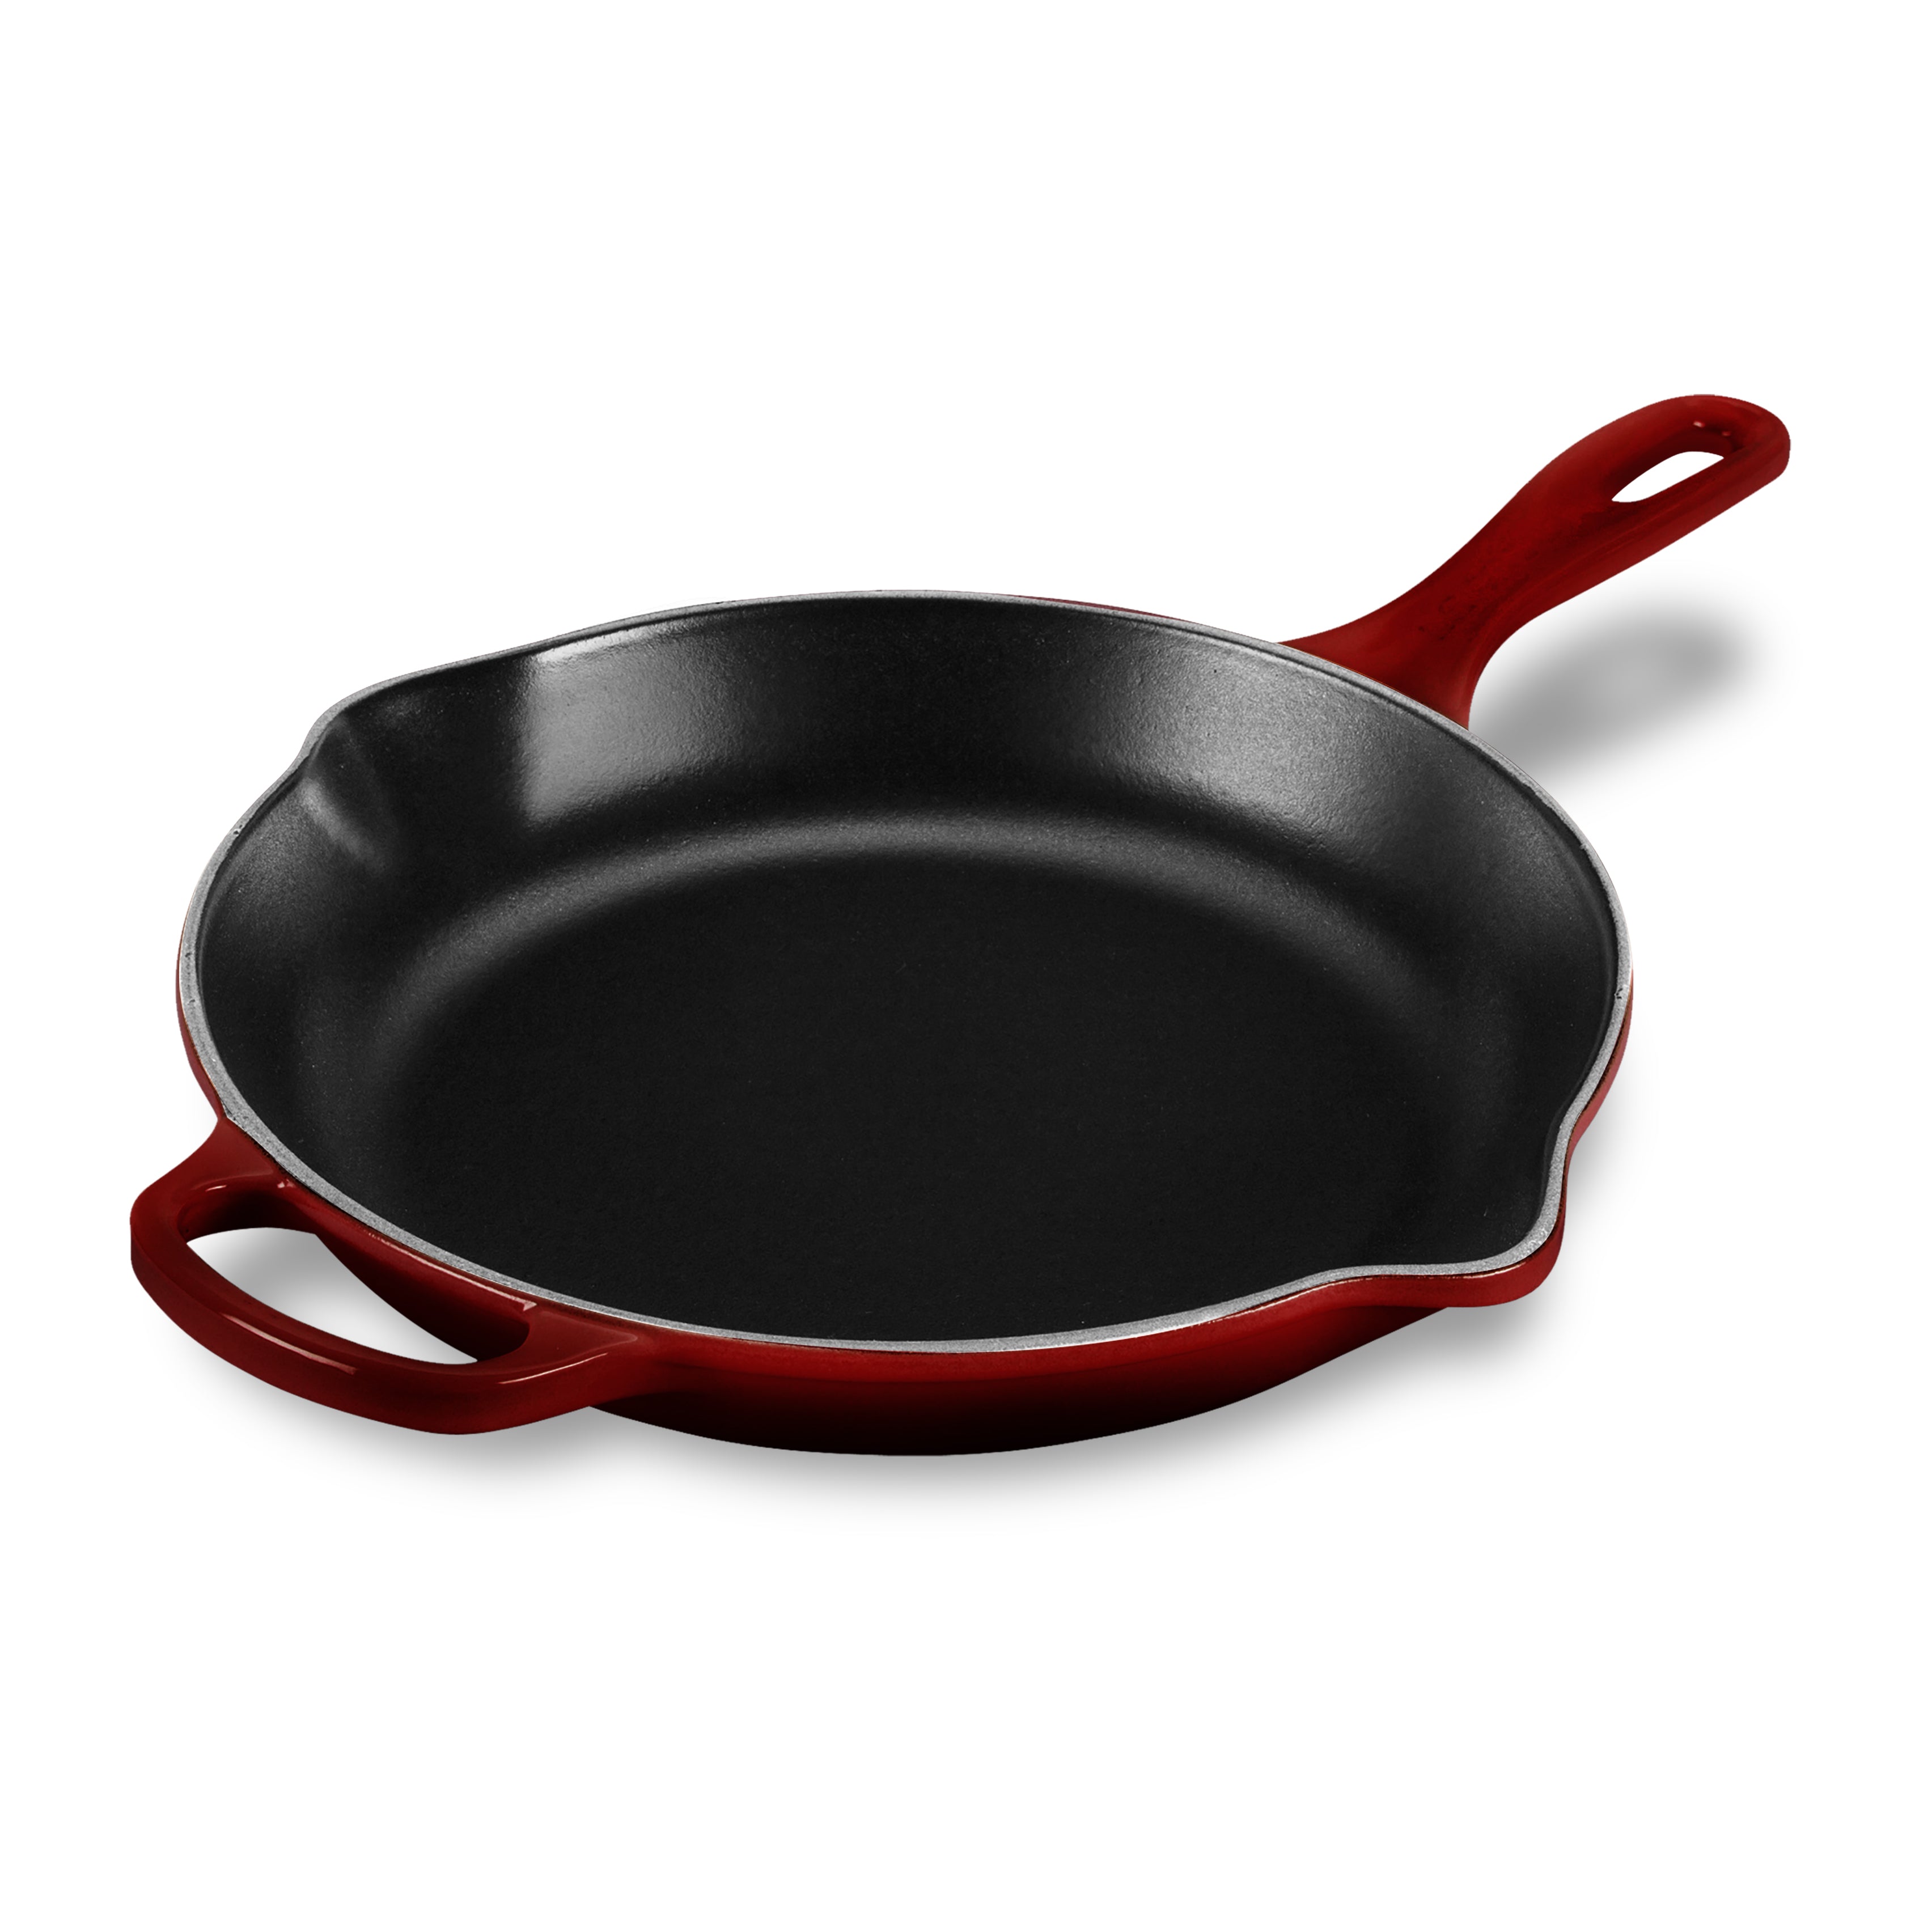 FD STYLE - Frying Pan from Japan